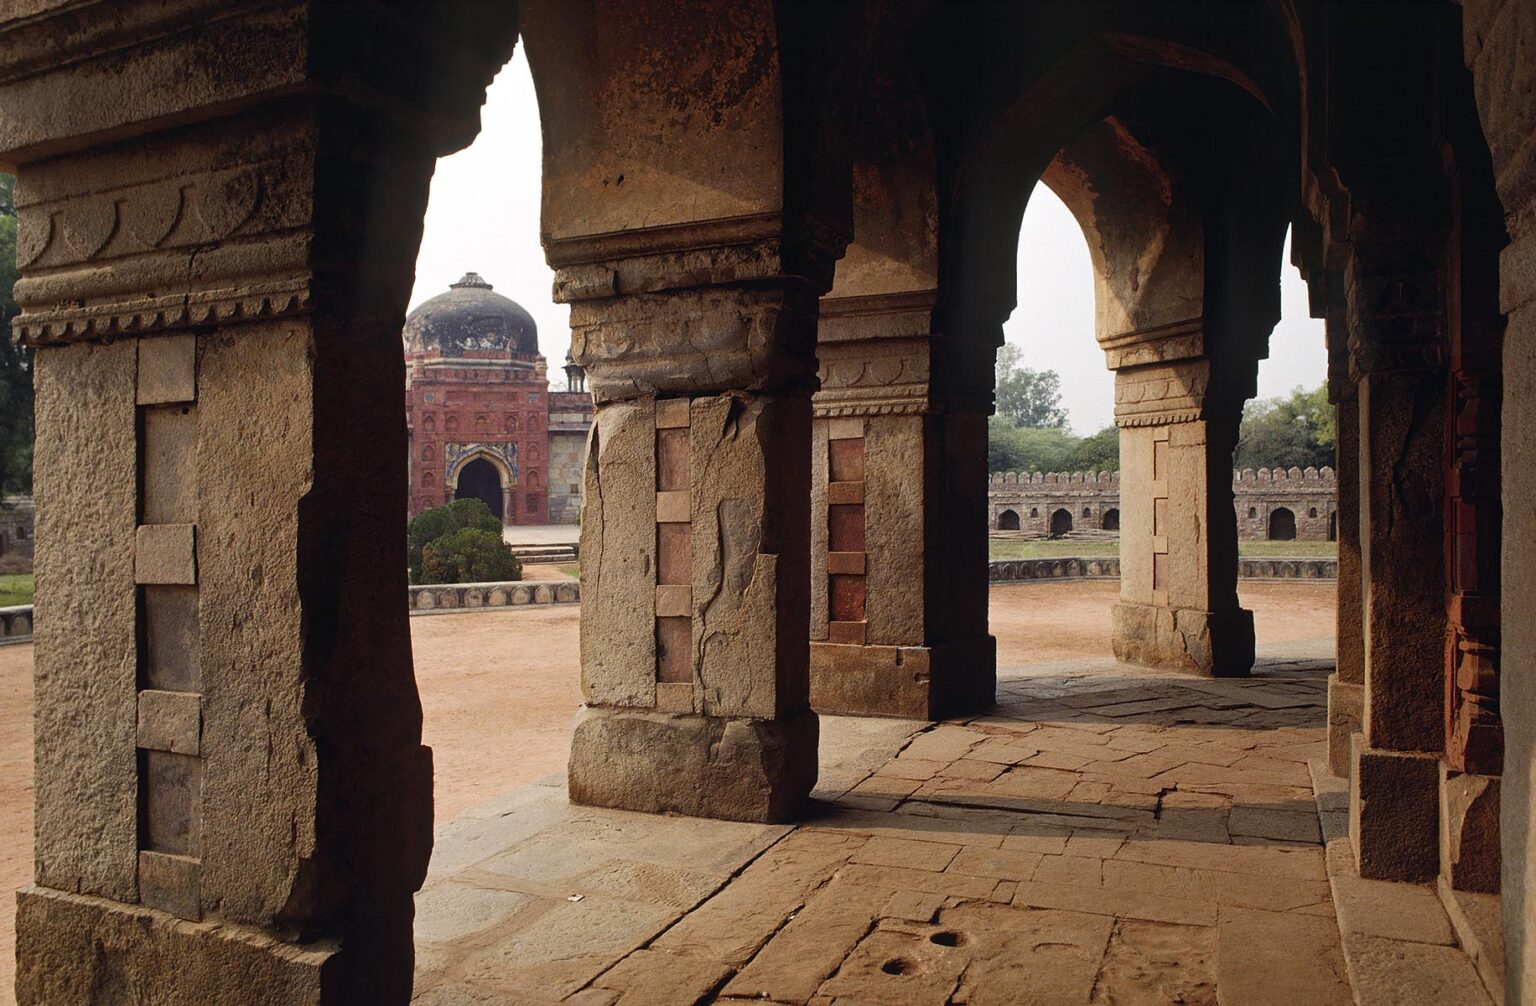 ARCHES of Pathan (Afghan) design at ISA KHAN'S tomb in front of the Moghul designed HUMAYUN'S TOMB - DELHI, INDIA